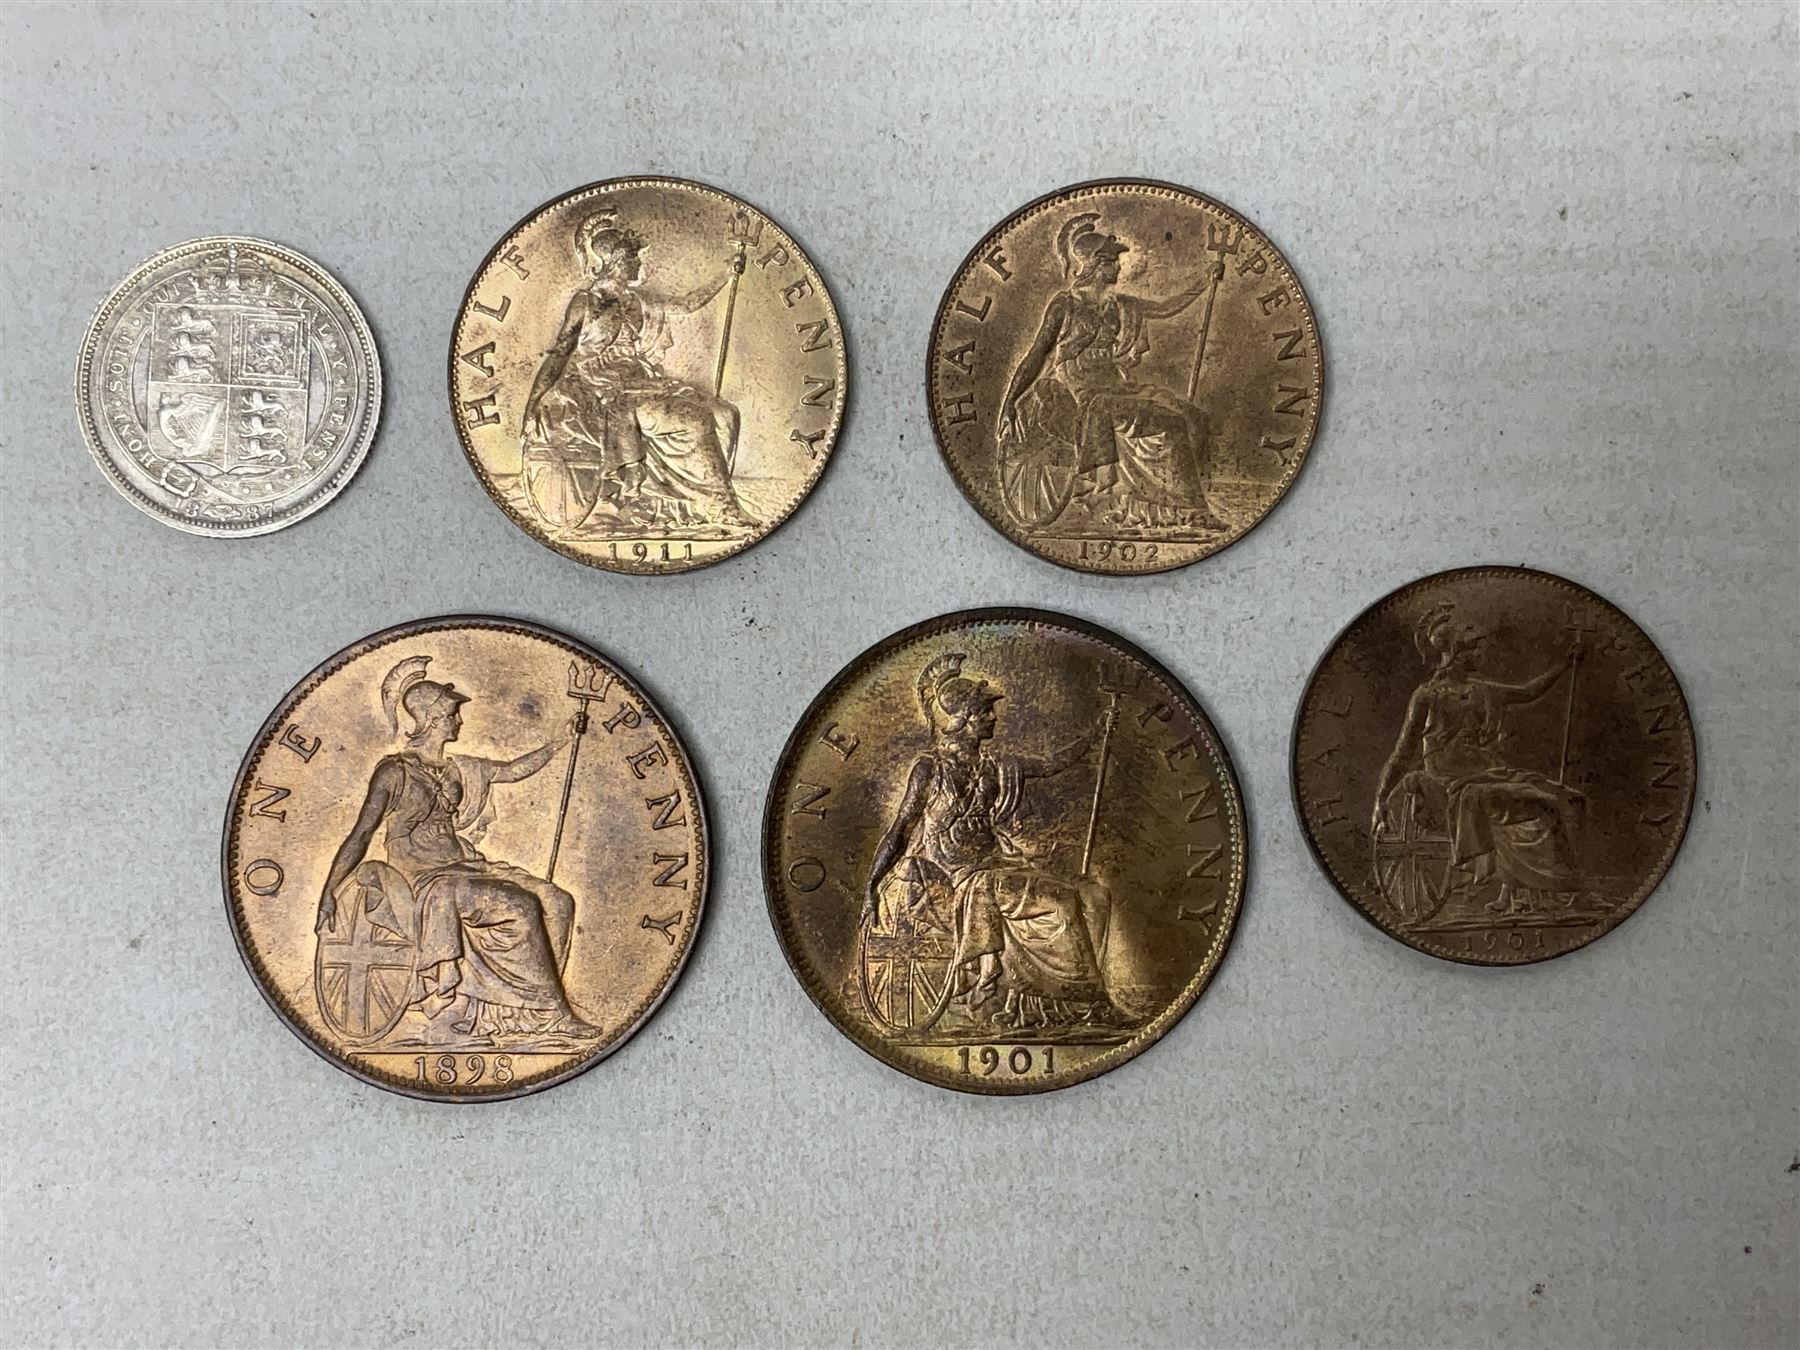 Queen Victoria 1898 and 1901 penny coins - Image 2 of 4